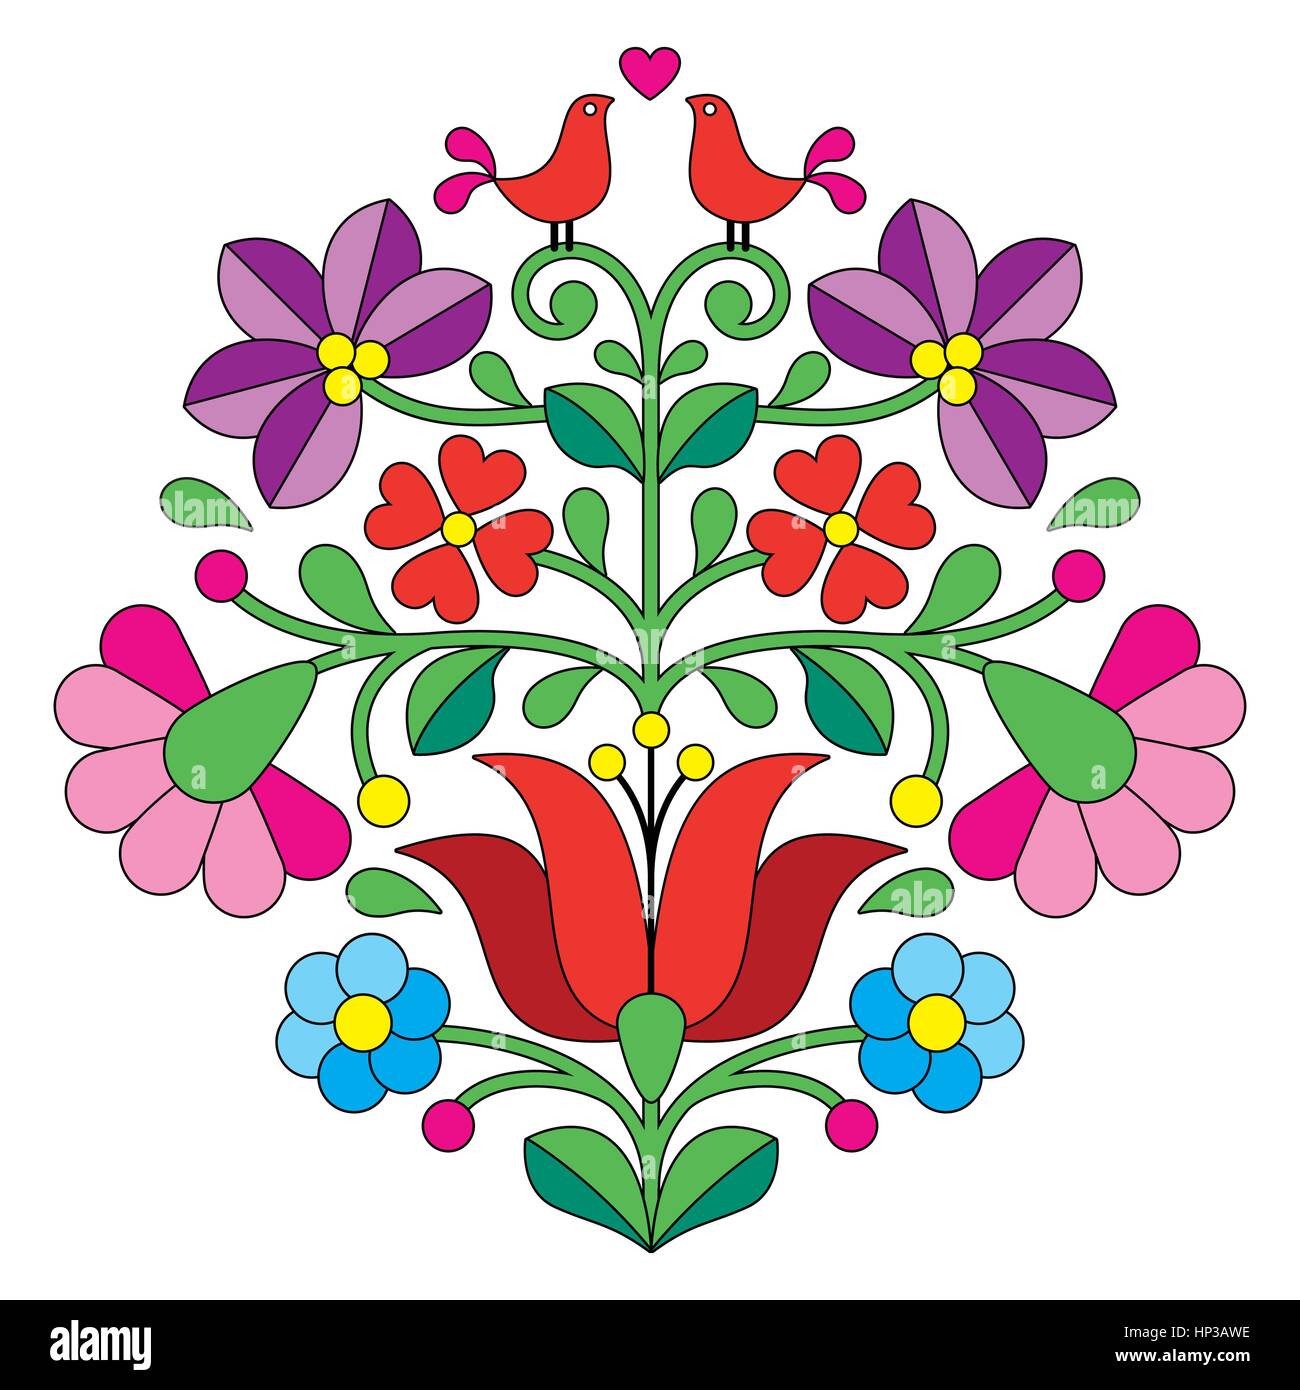 Kalocsai embroidery - Hungarian floral folk pattern with birds. Vector background - traditional pattern from Hungary isolated on white Stock Vector